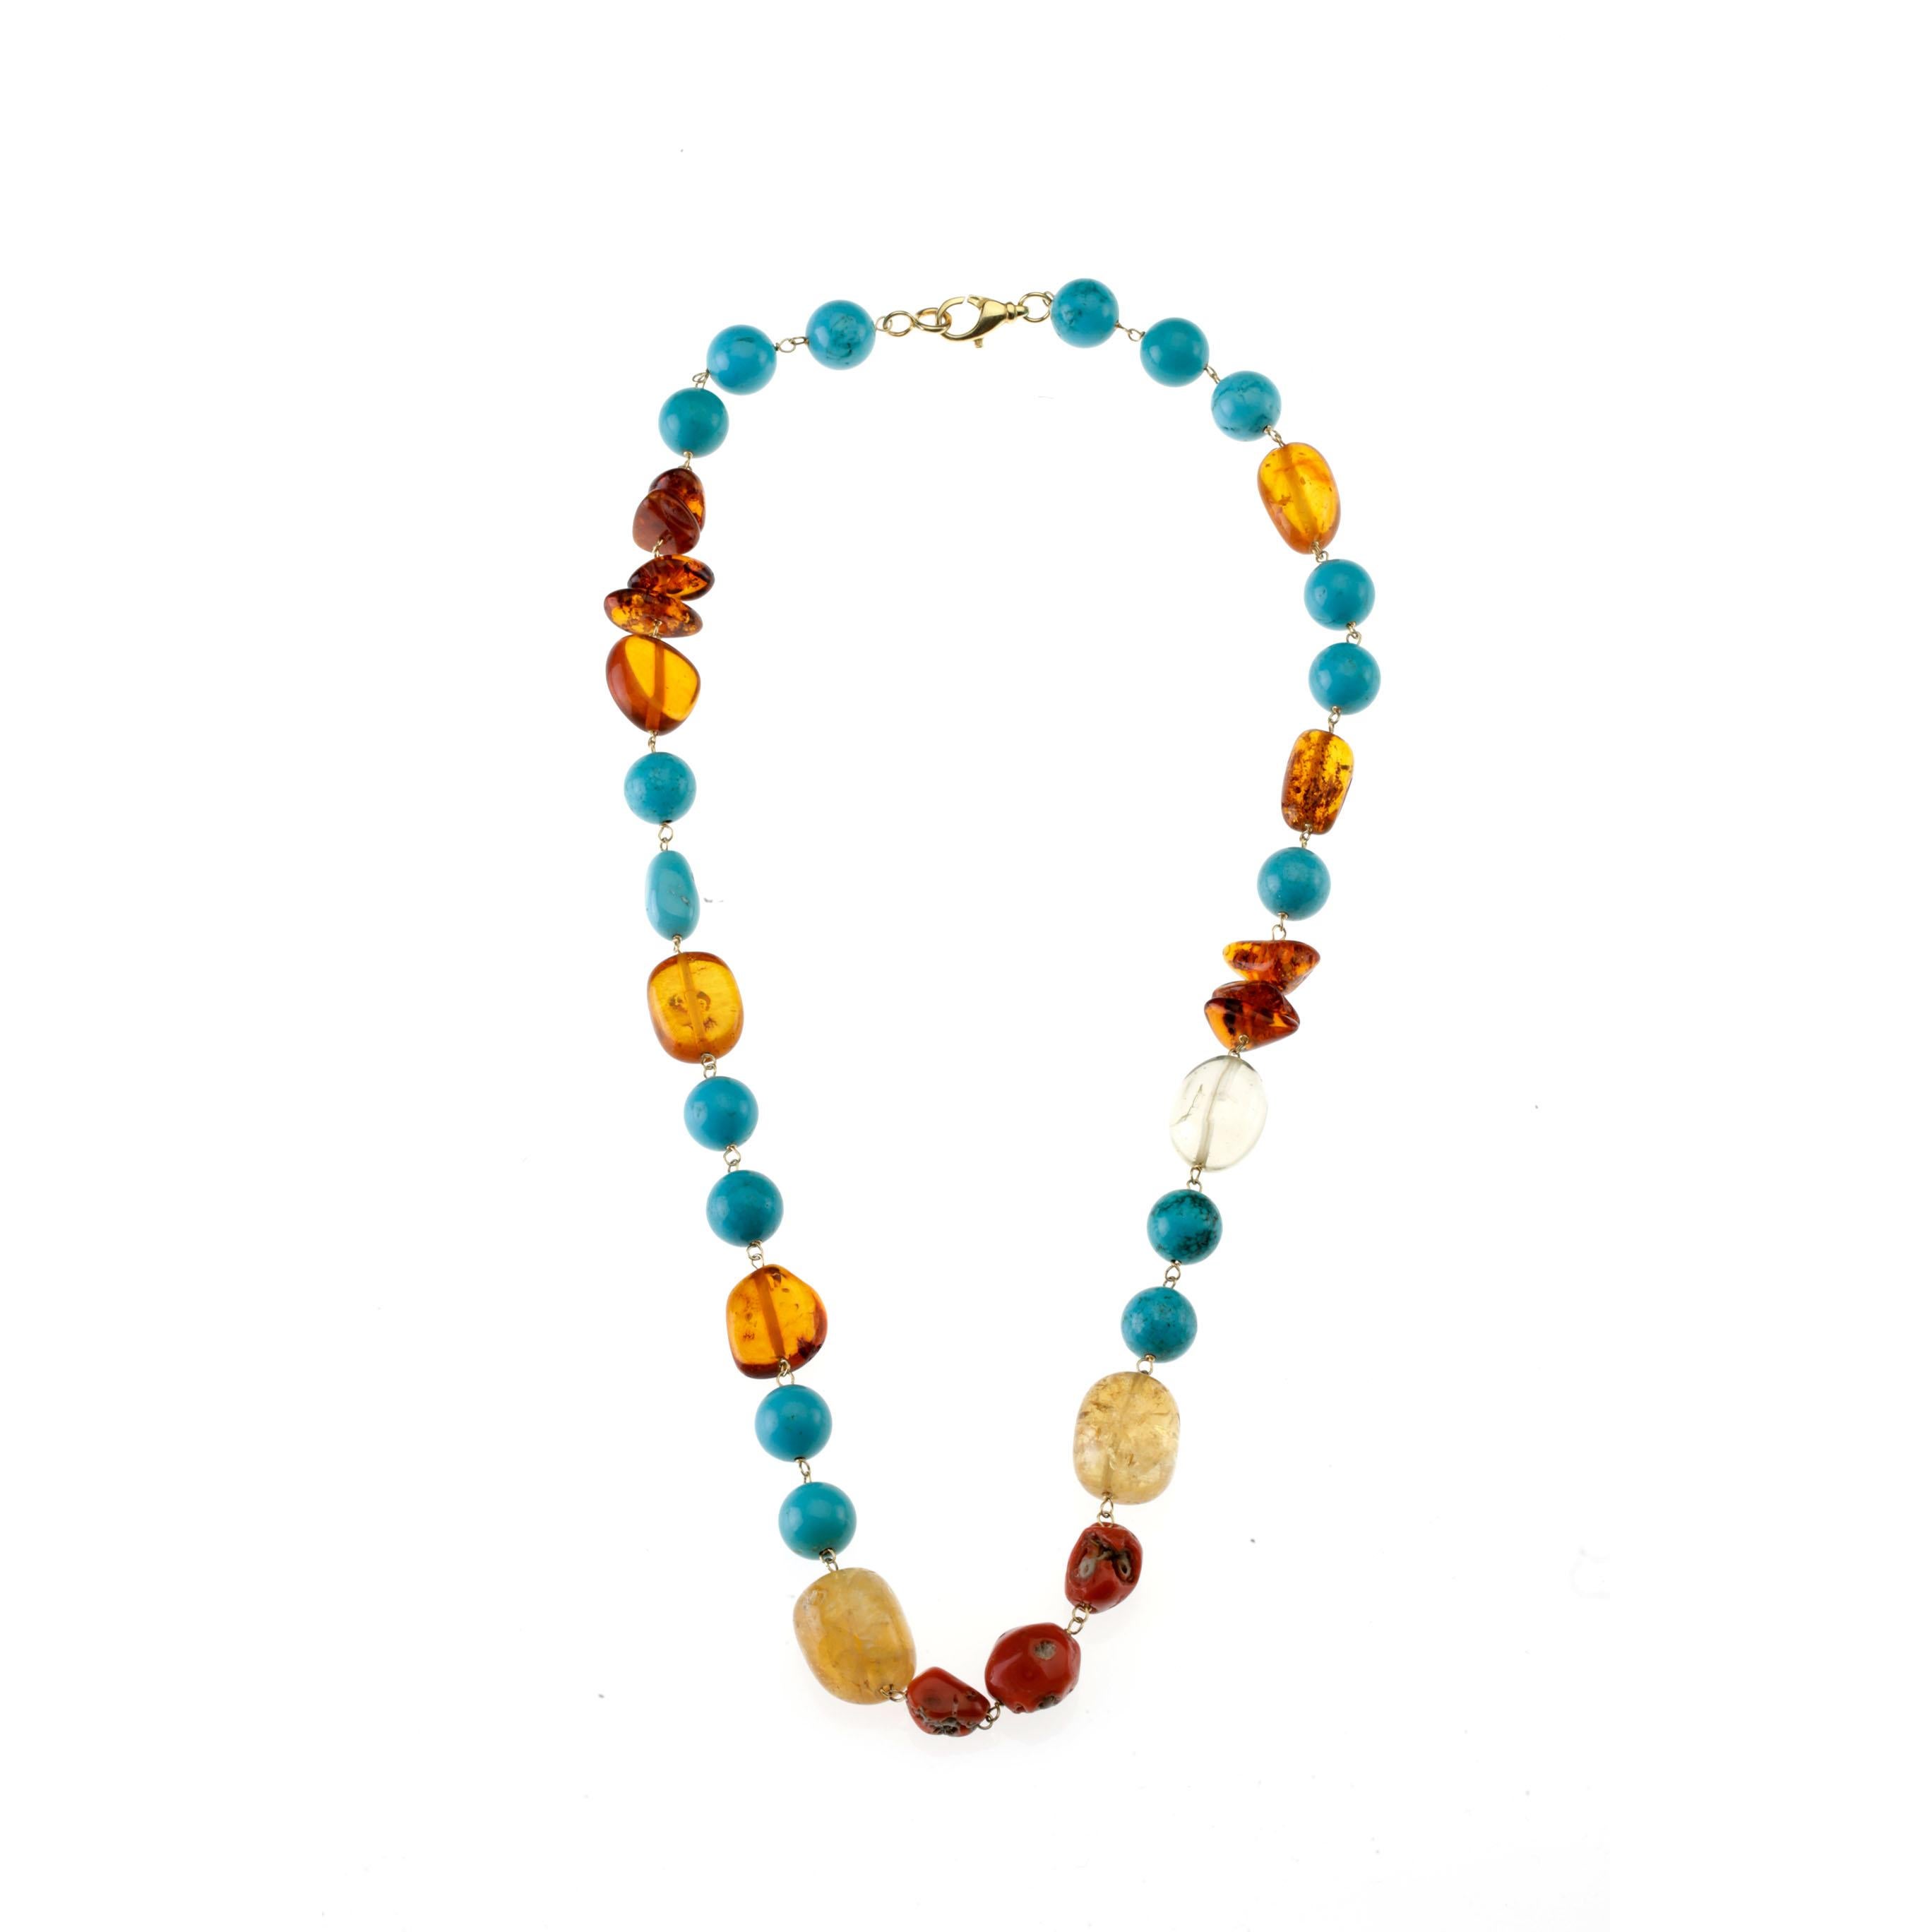 Turquoise Amber Citrine Long  Vermeille Necklace cm 75.
All Giulia Colussi jewelry is new and has never been previously owned or worn. Each item will arrive at your door beautifully gift wrapped in our boxes, put inside an elegant pouch or jewel